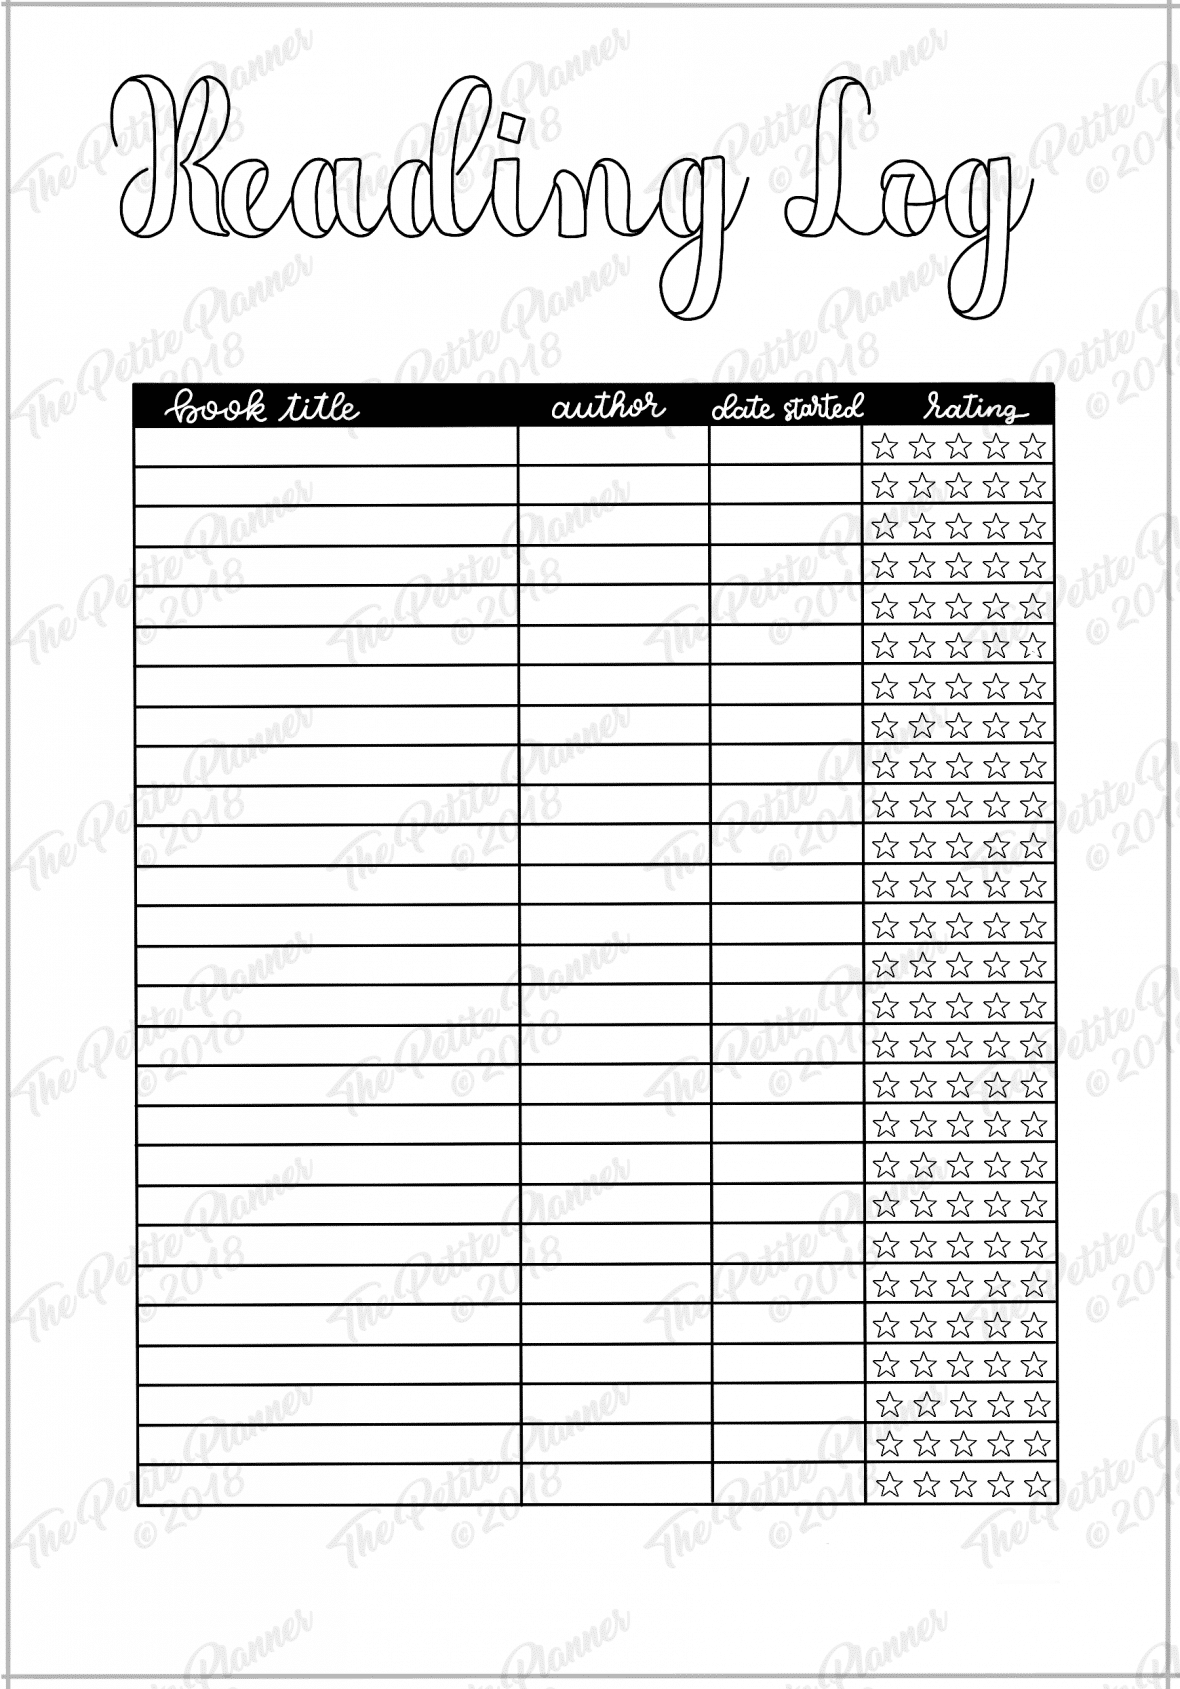 Books To Read Reading Log Printable The Petite Planner